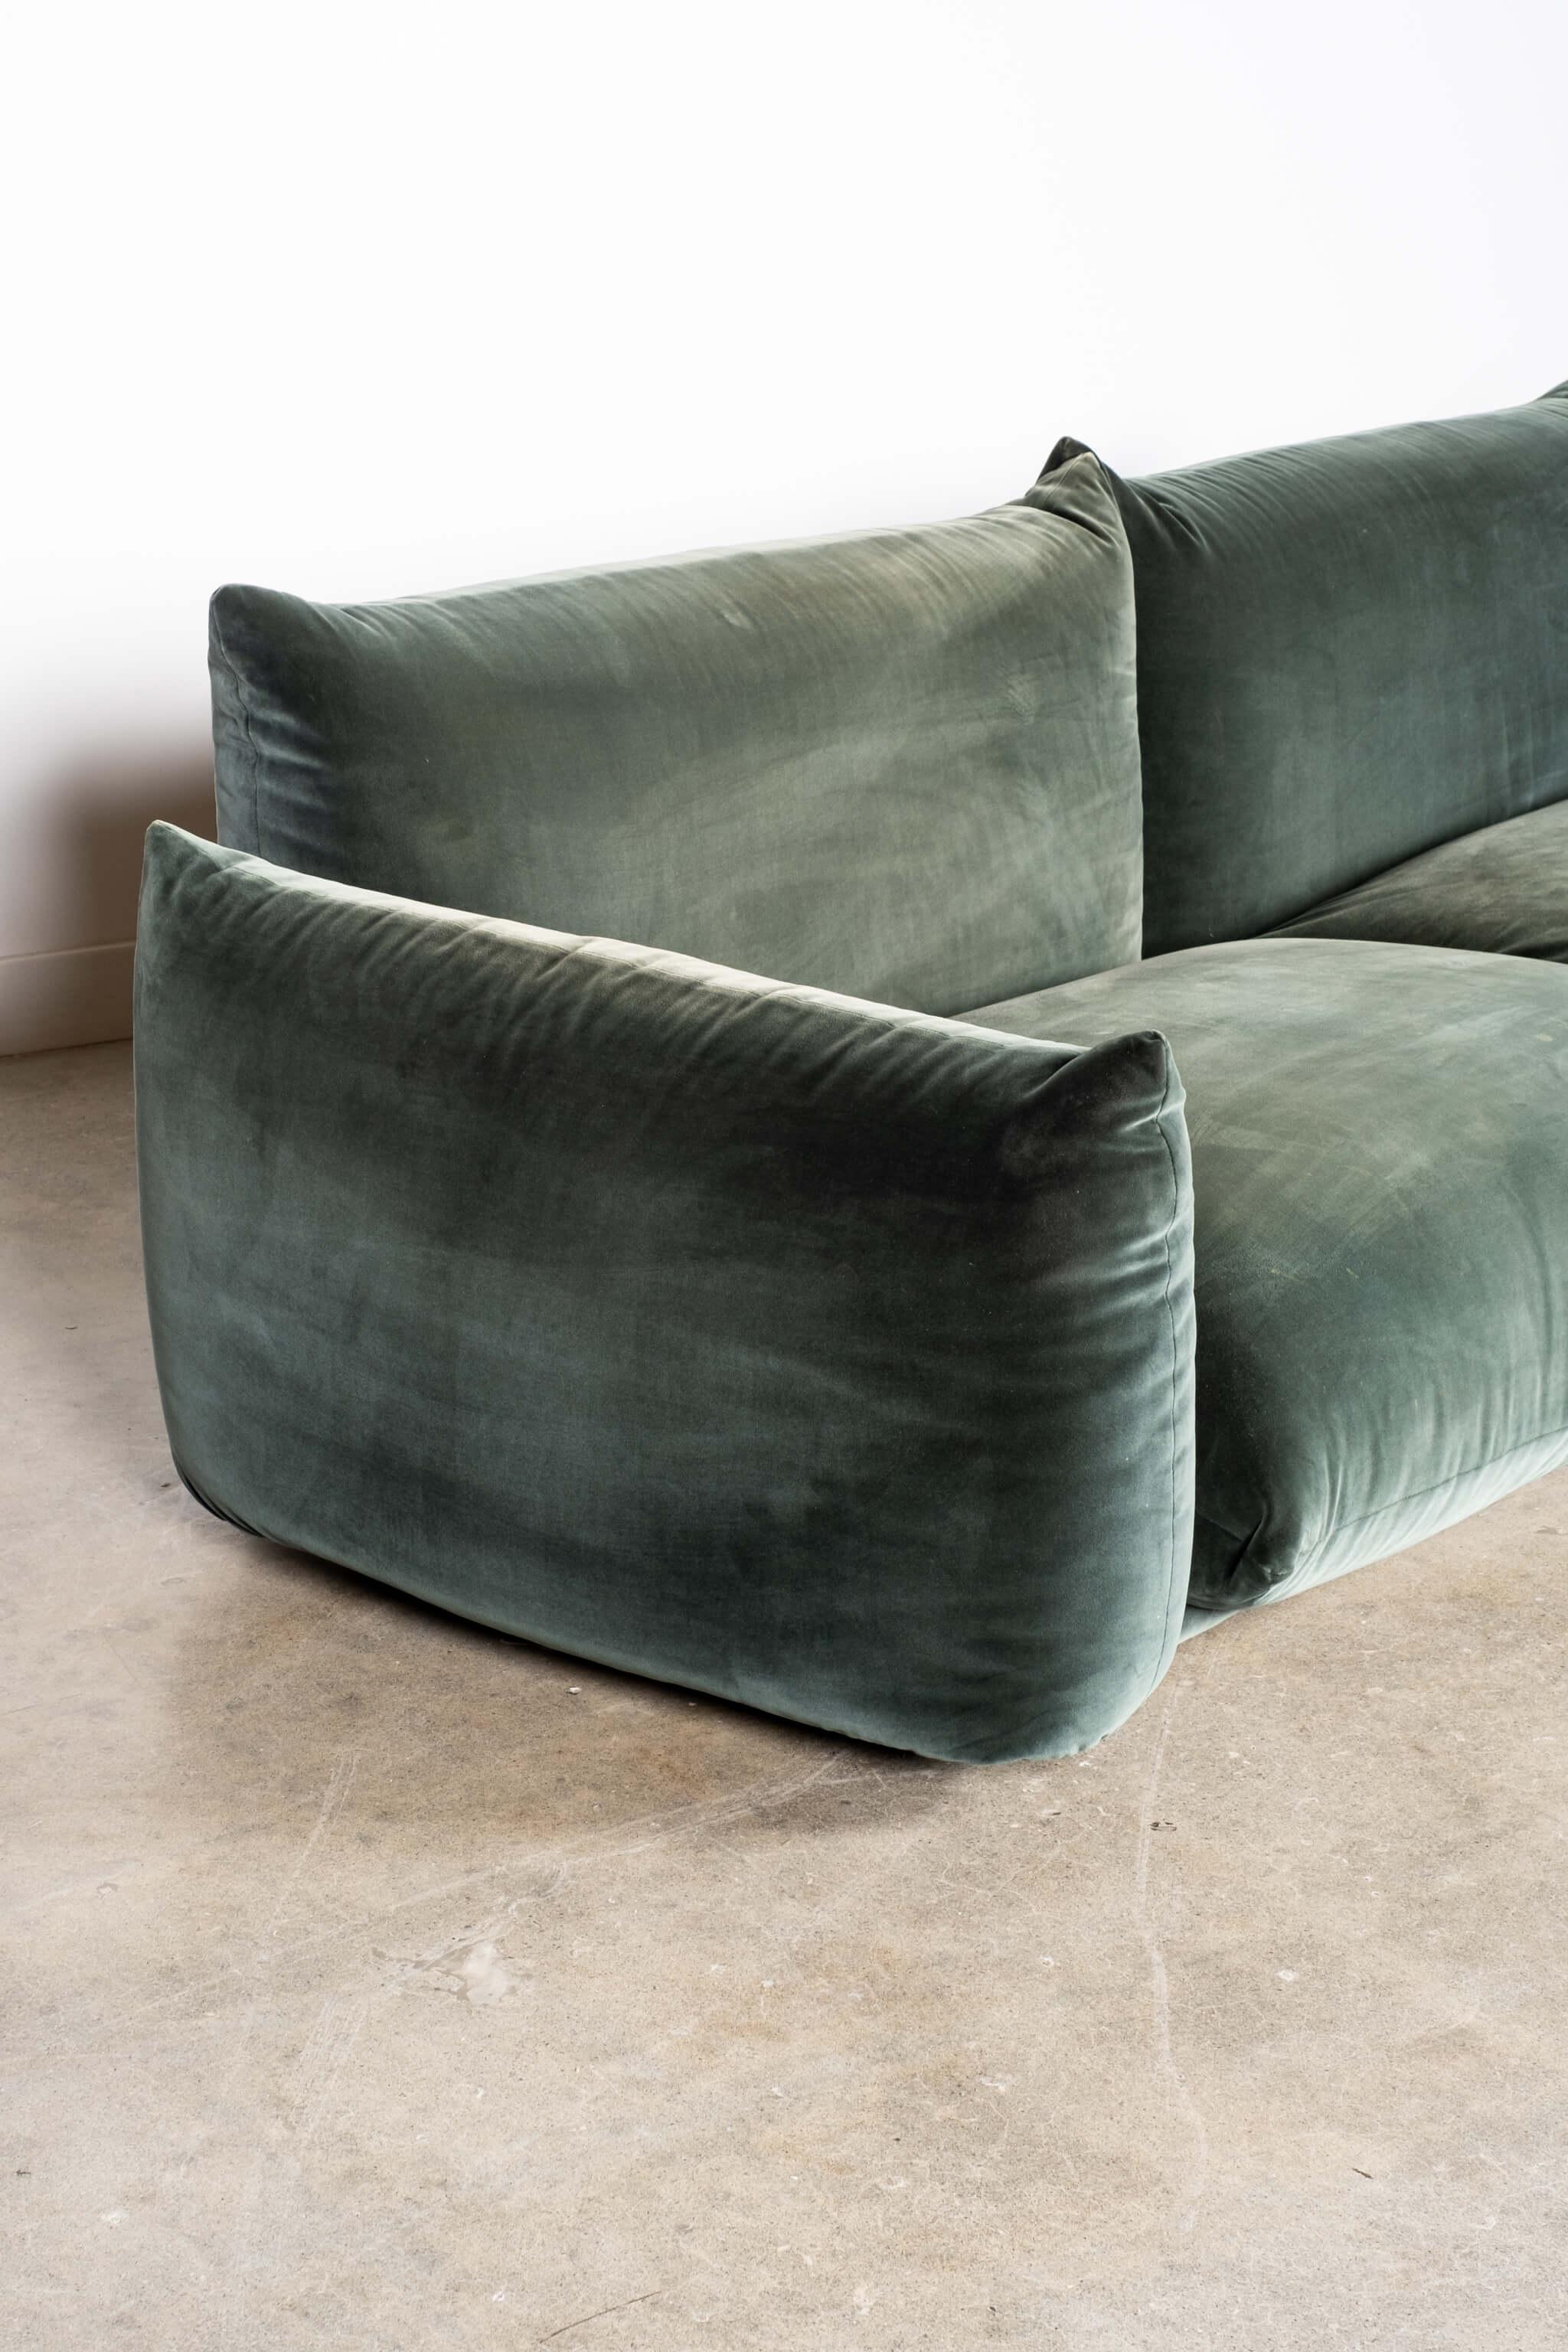 Marenco 1 Arm 2-Seater Sofa in Green Velvet by Mario Marenco For Sale 1